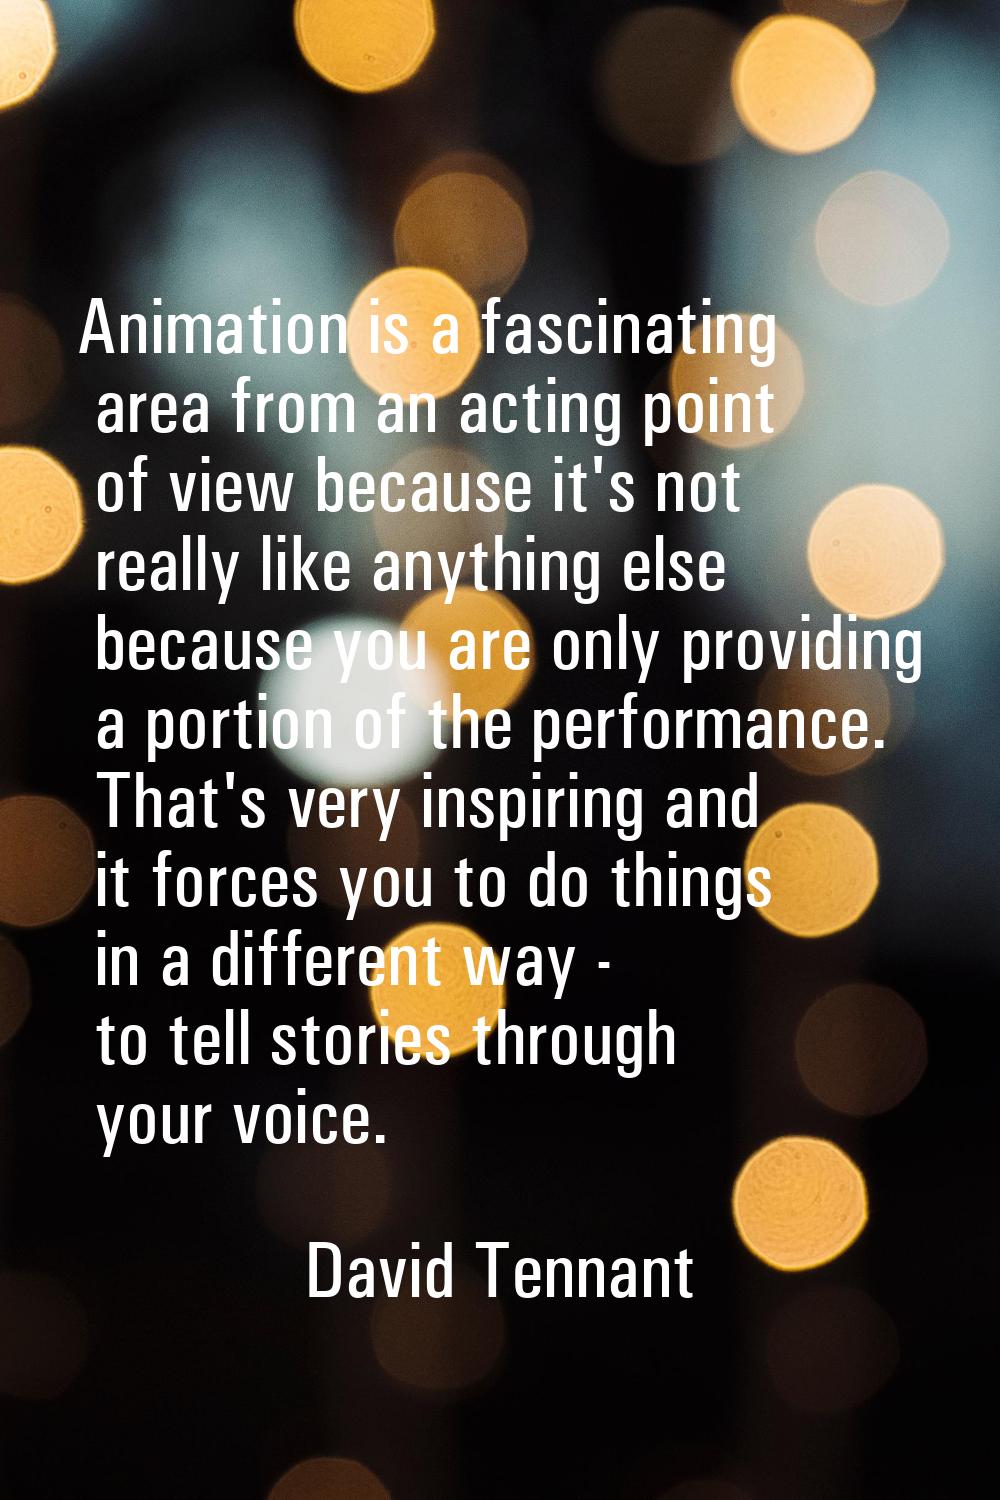 Animation is a fascinating area from an acting point of view because it's not really like anything 